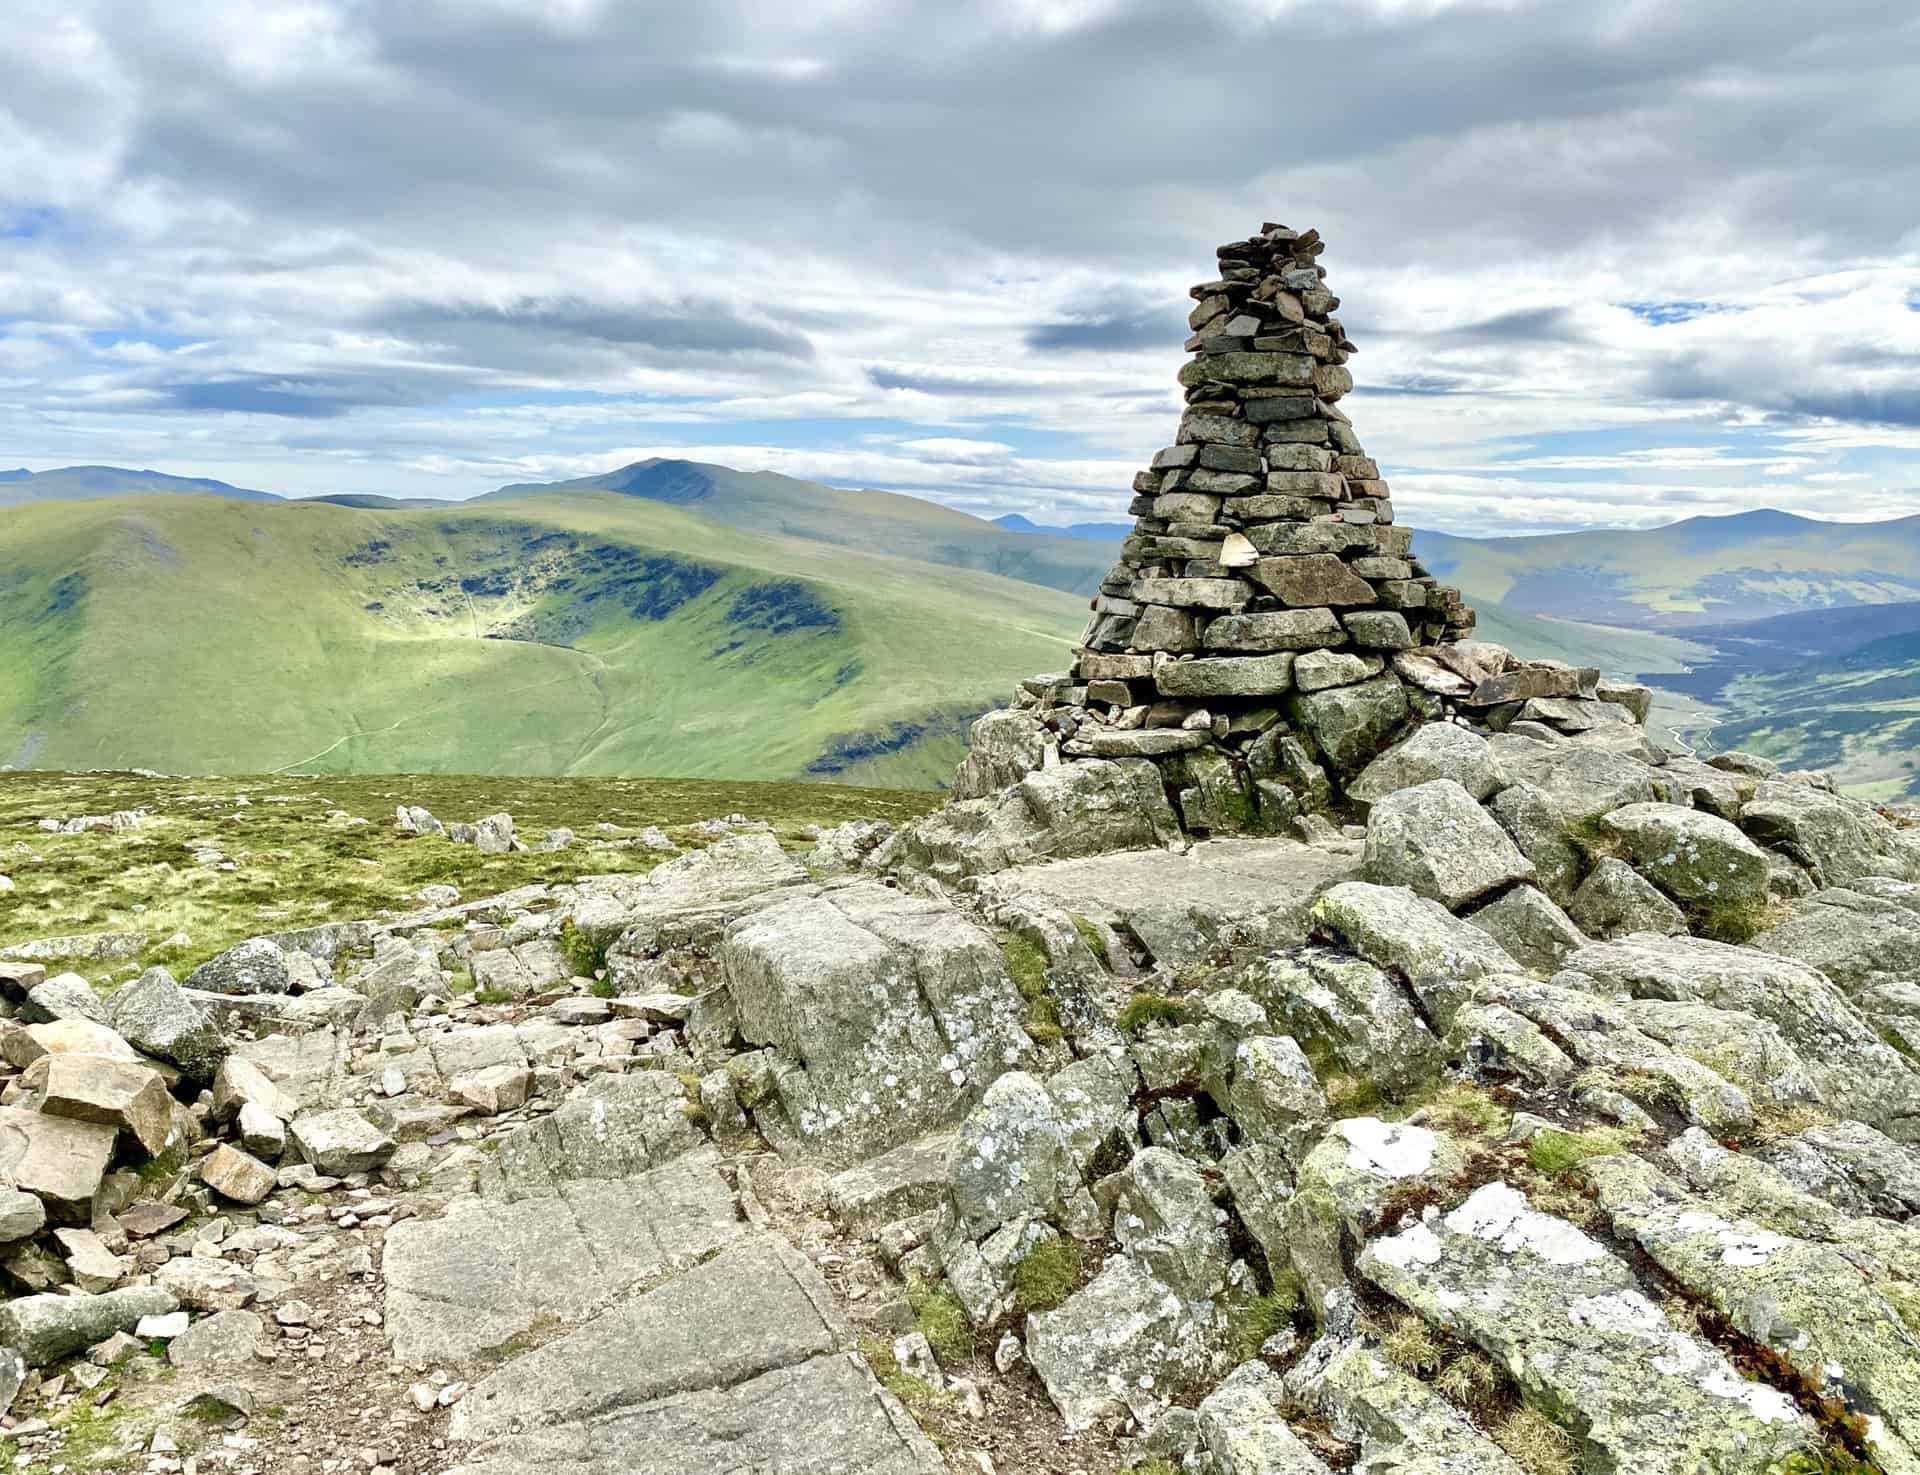 The summit of Carrock Fell, height 649 metres (2129 feet).